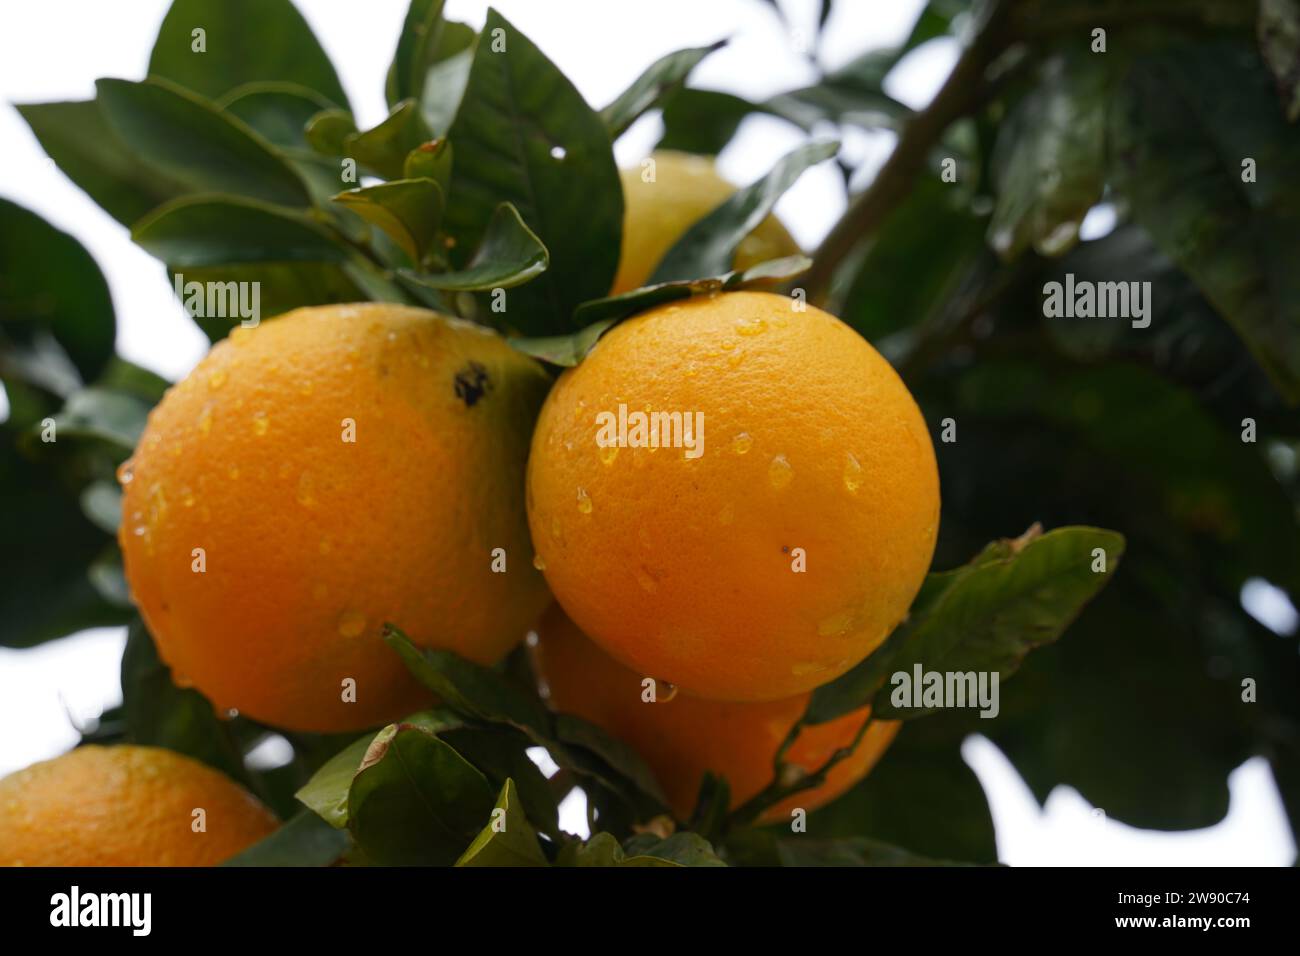 Oranges on a branch with green leaves on tree, and drops of water on them Stock Photo